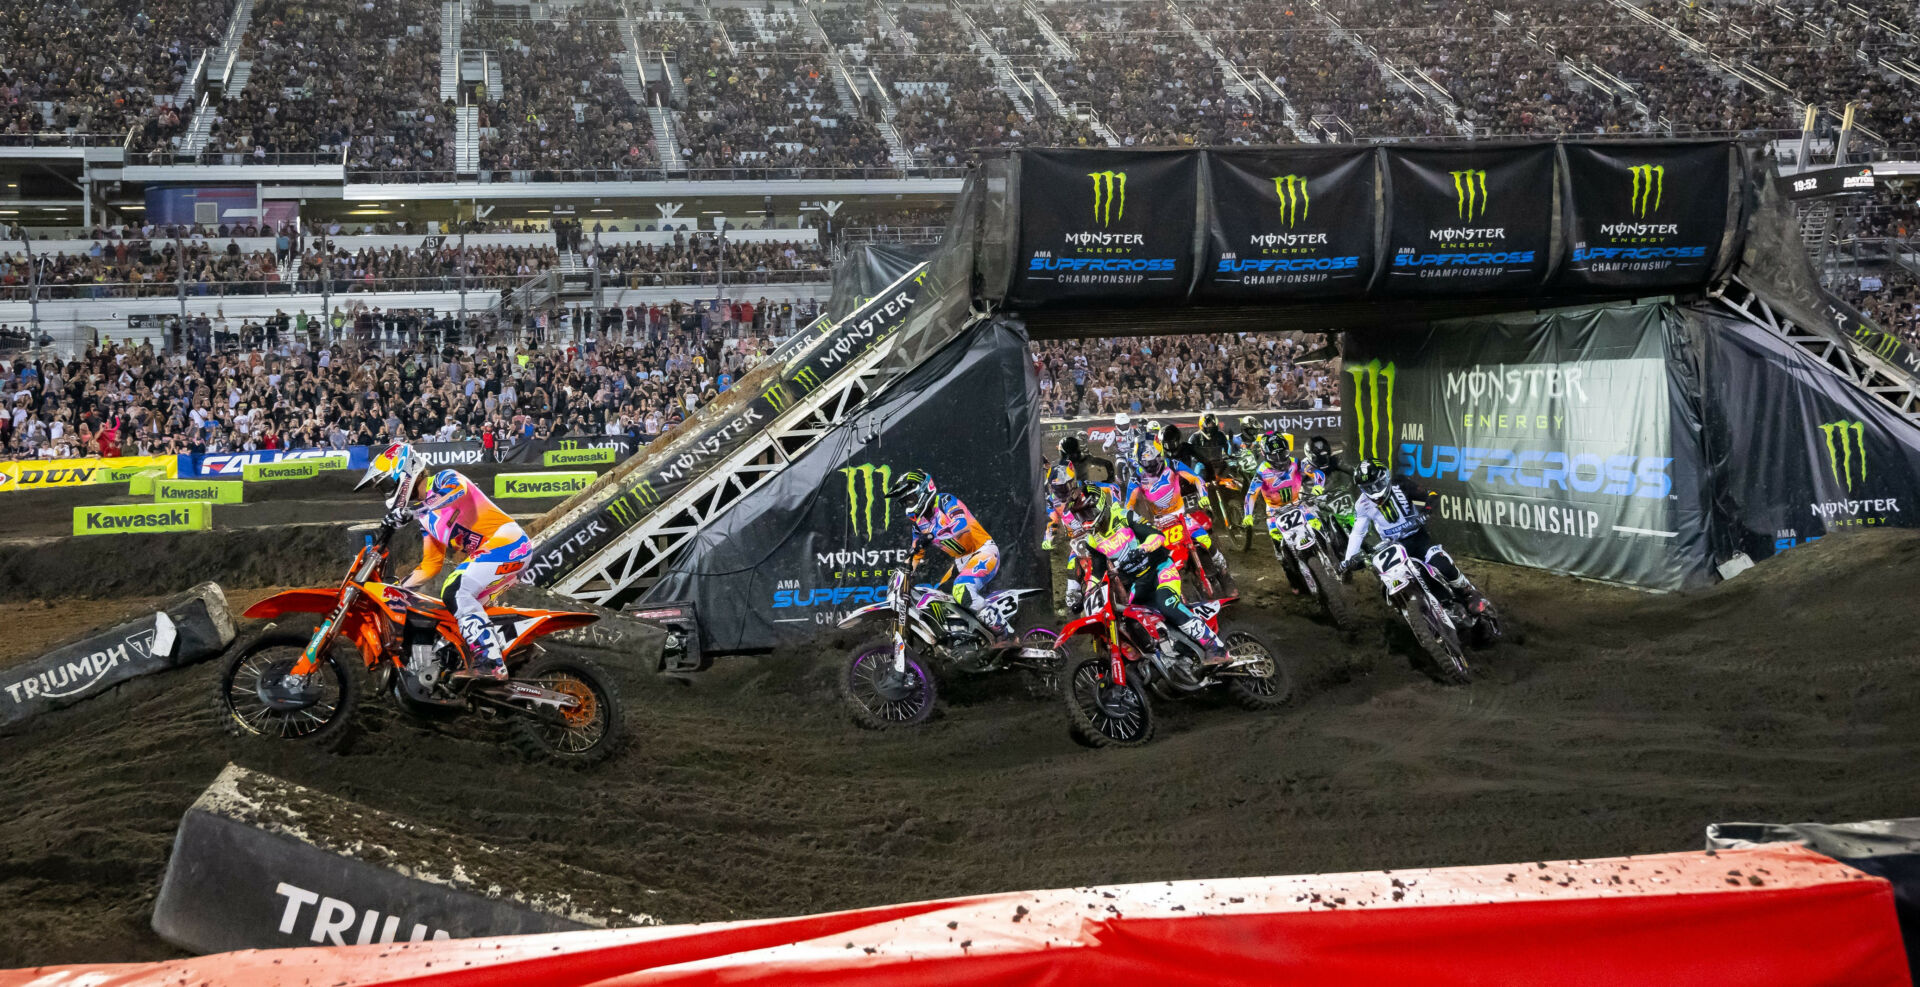 In perfect celebration of the 50th anniversary season of AMA Supercross racing, the Daytona International Speedway is the only venue to host a Supercross race every season, uninterrupted, since the start of the series. Photo courtesy Feld Motor Sports.